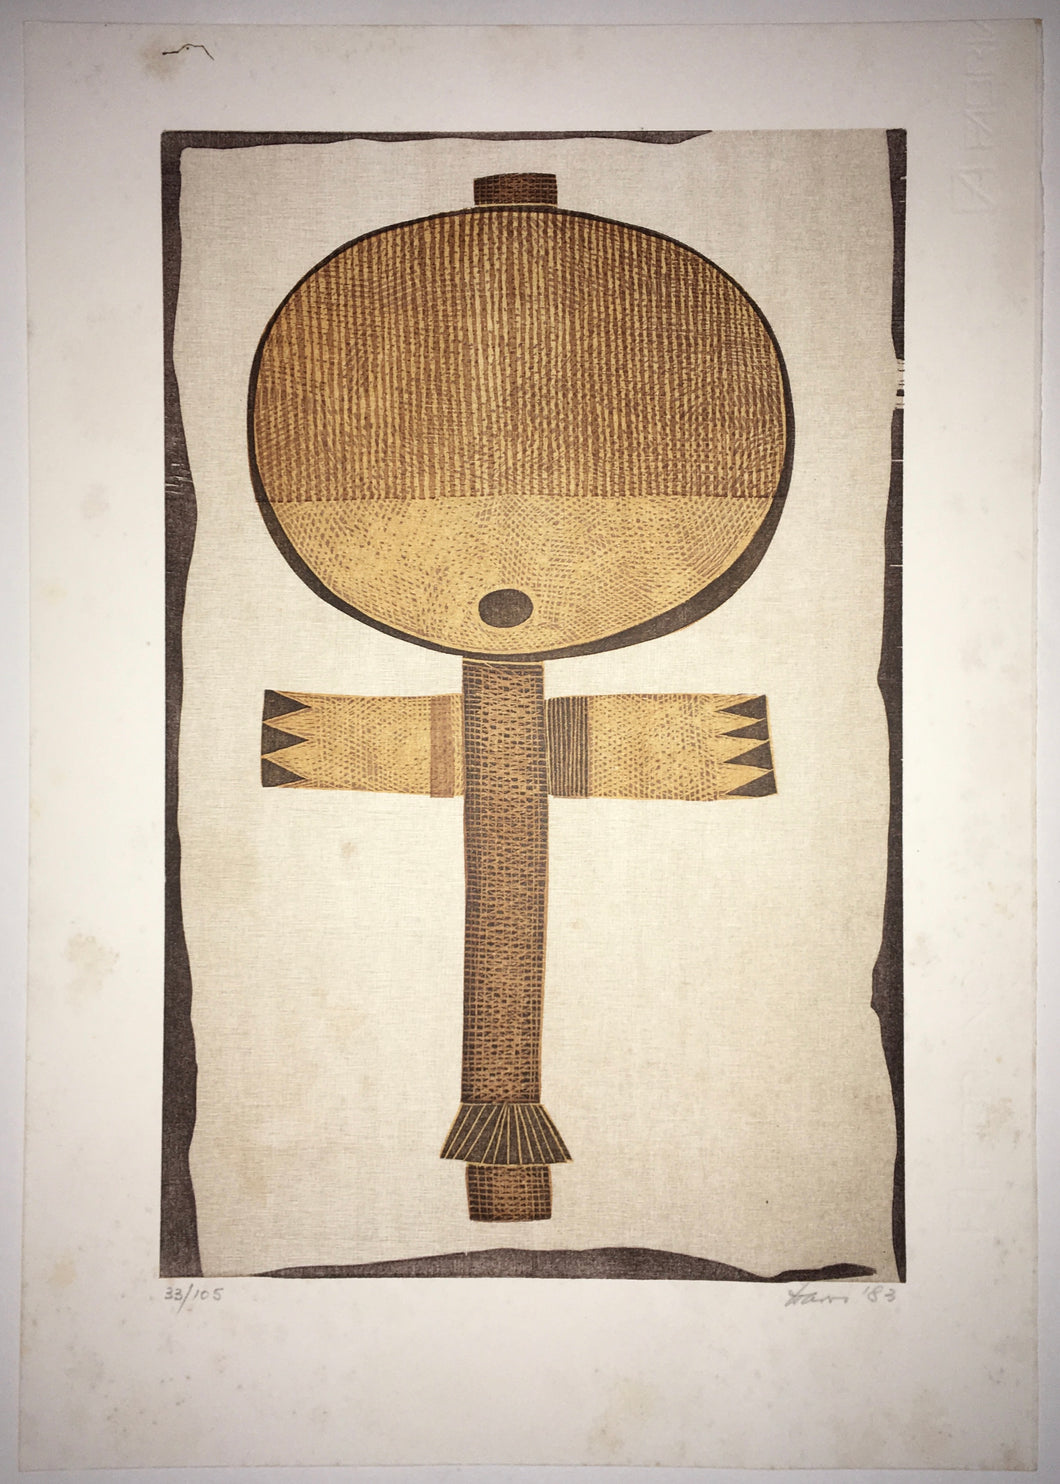 Hannes HARRS (1927-2006) Abstract Fertility Doll composition in colour Edition 33/105 1983 Original Signed Print (South African Artist)